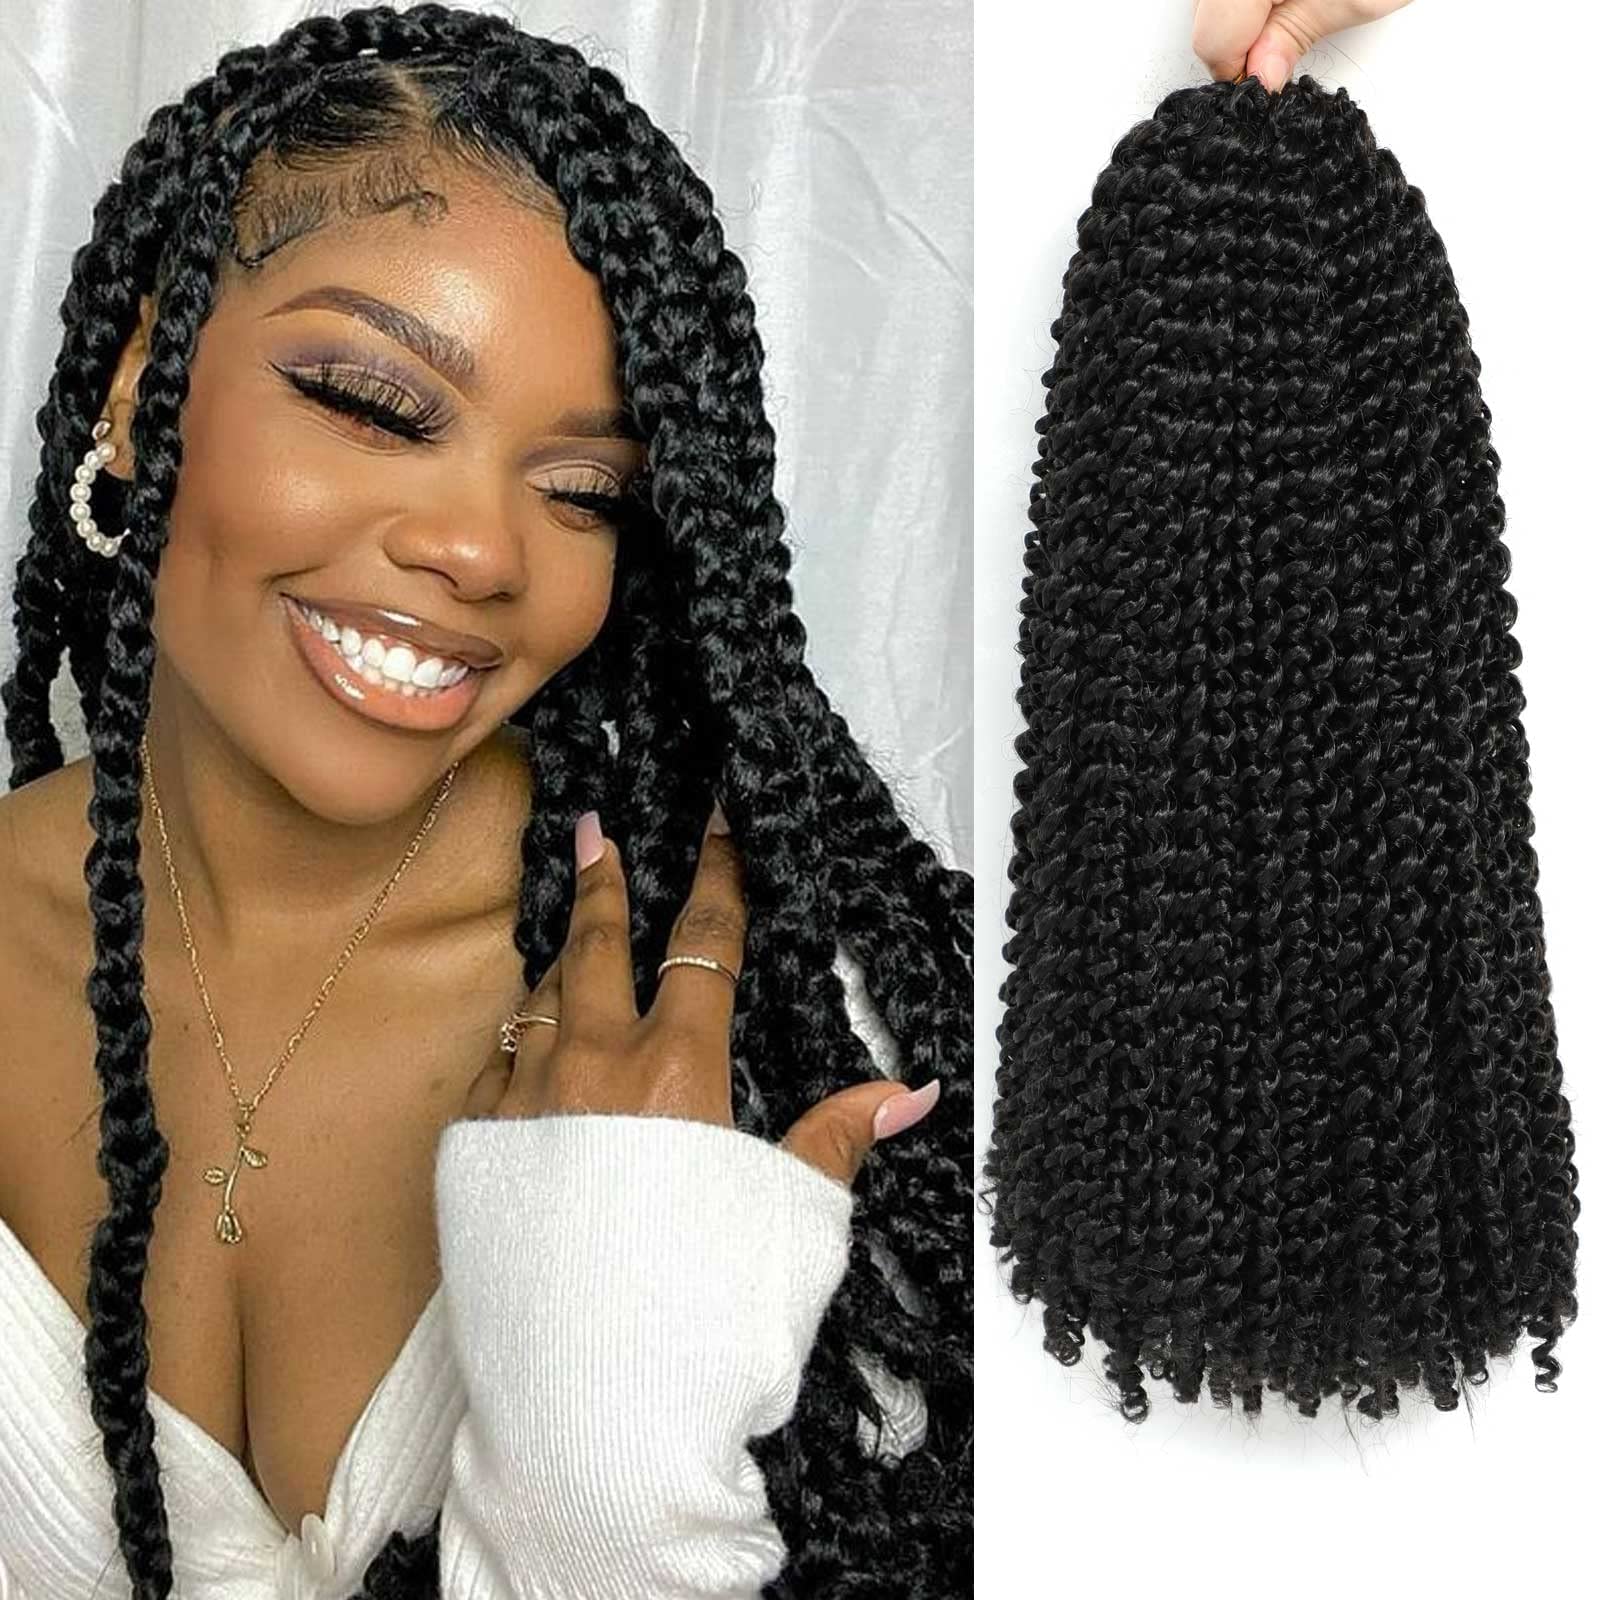 Passion Twist Hair 18 Inch Water Wave Crochet Braids for Butterfly Locs or Bohemian Twists hair Synthetic Braiding Hair Extensions LS06